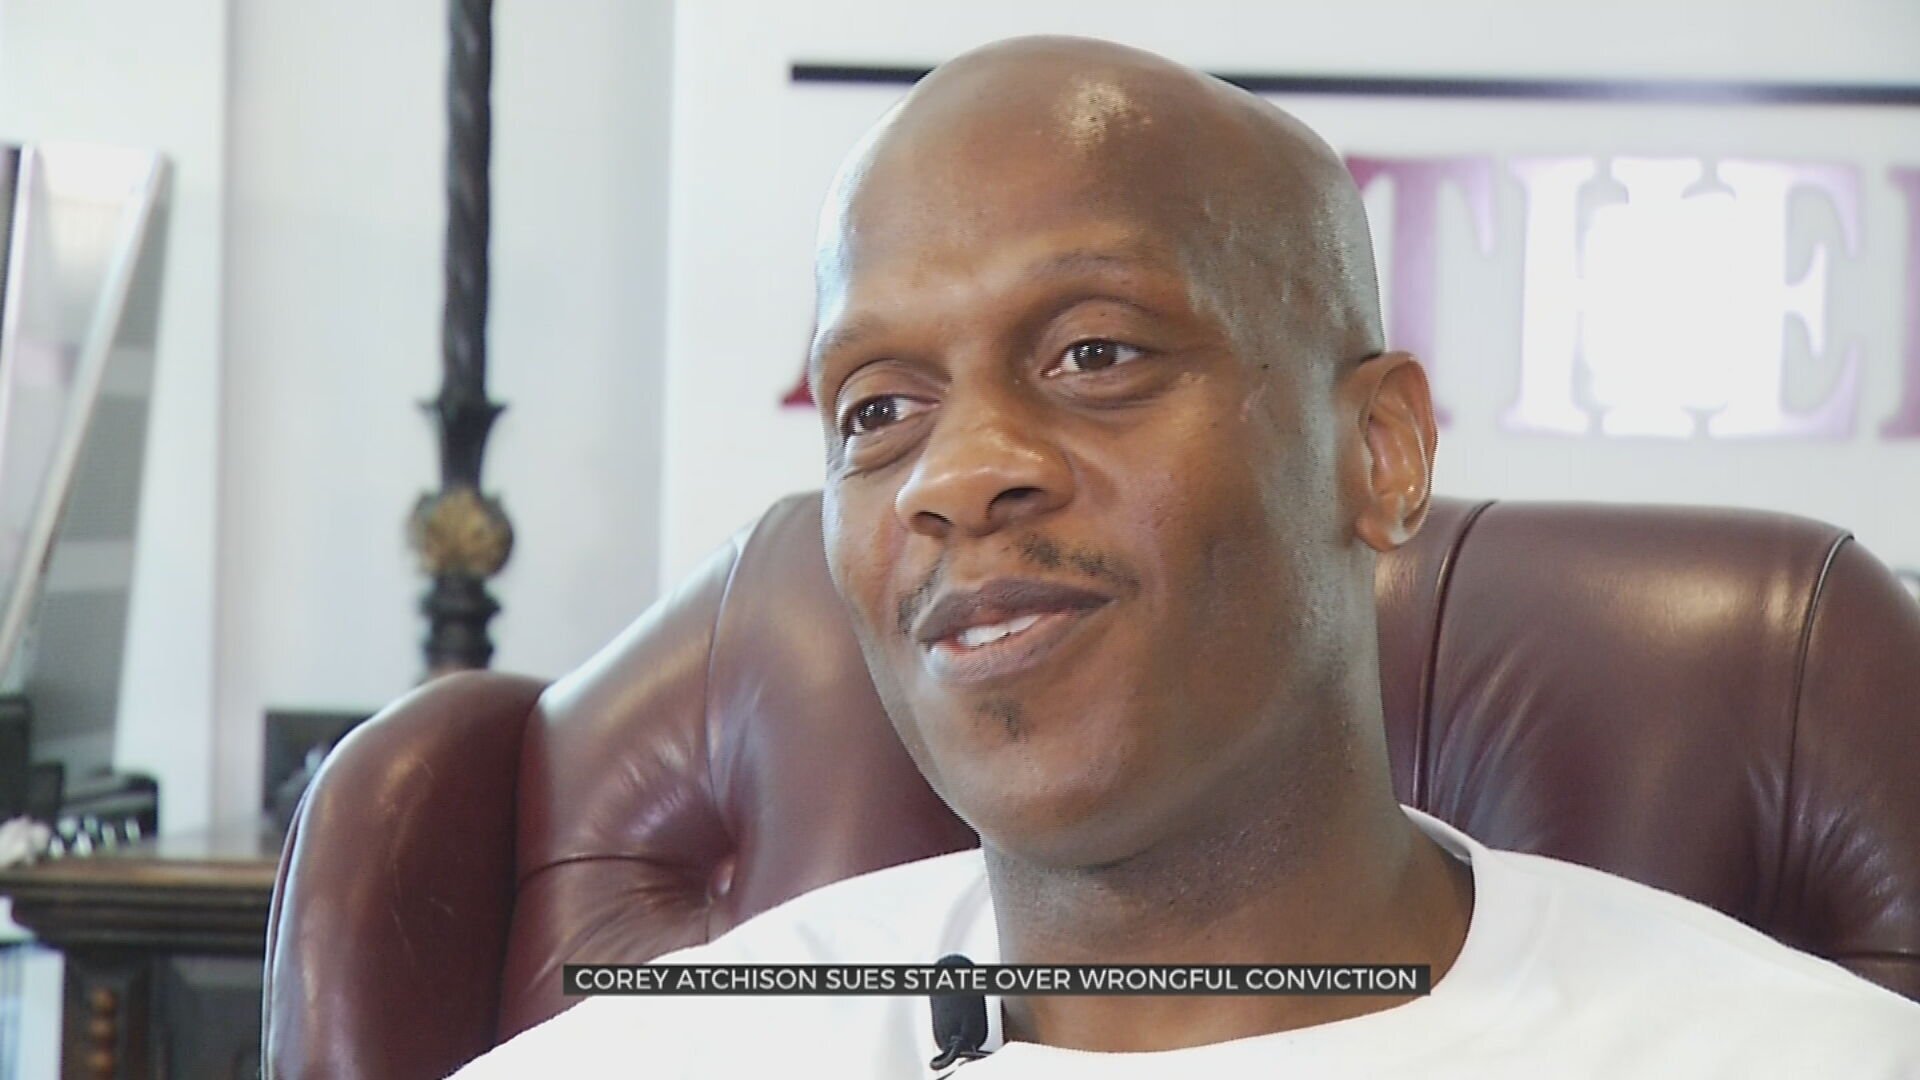 Man Who Served Nearly 30 Years Sues State Over Wrongful Conviction 